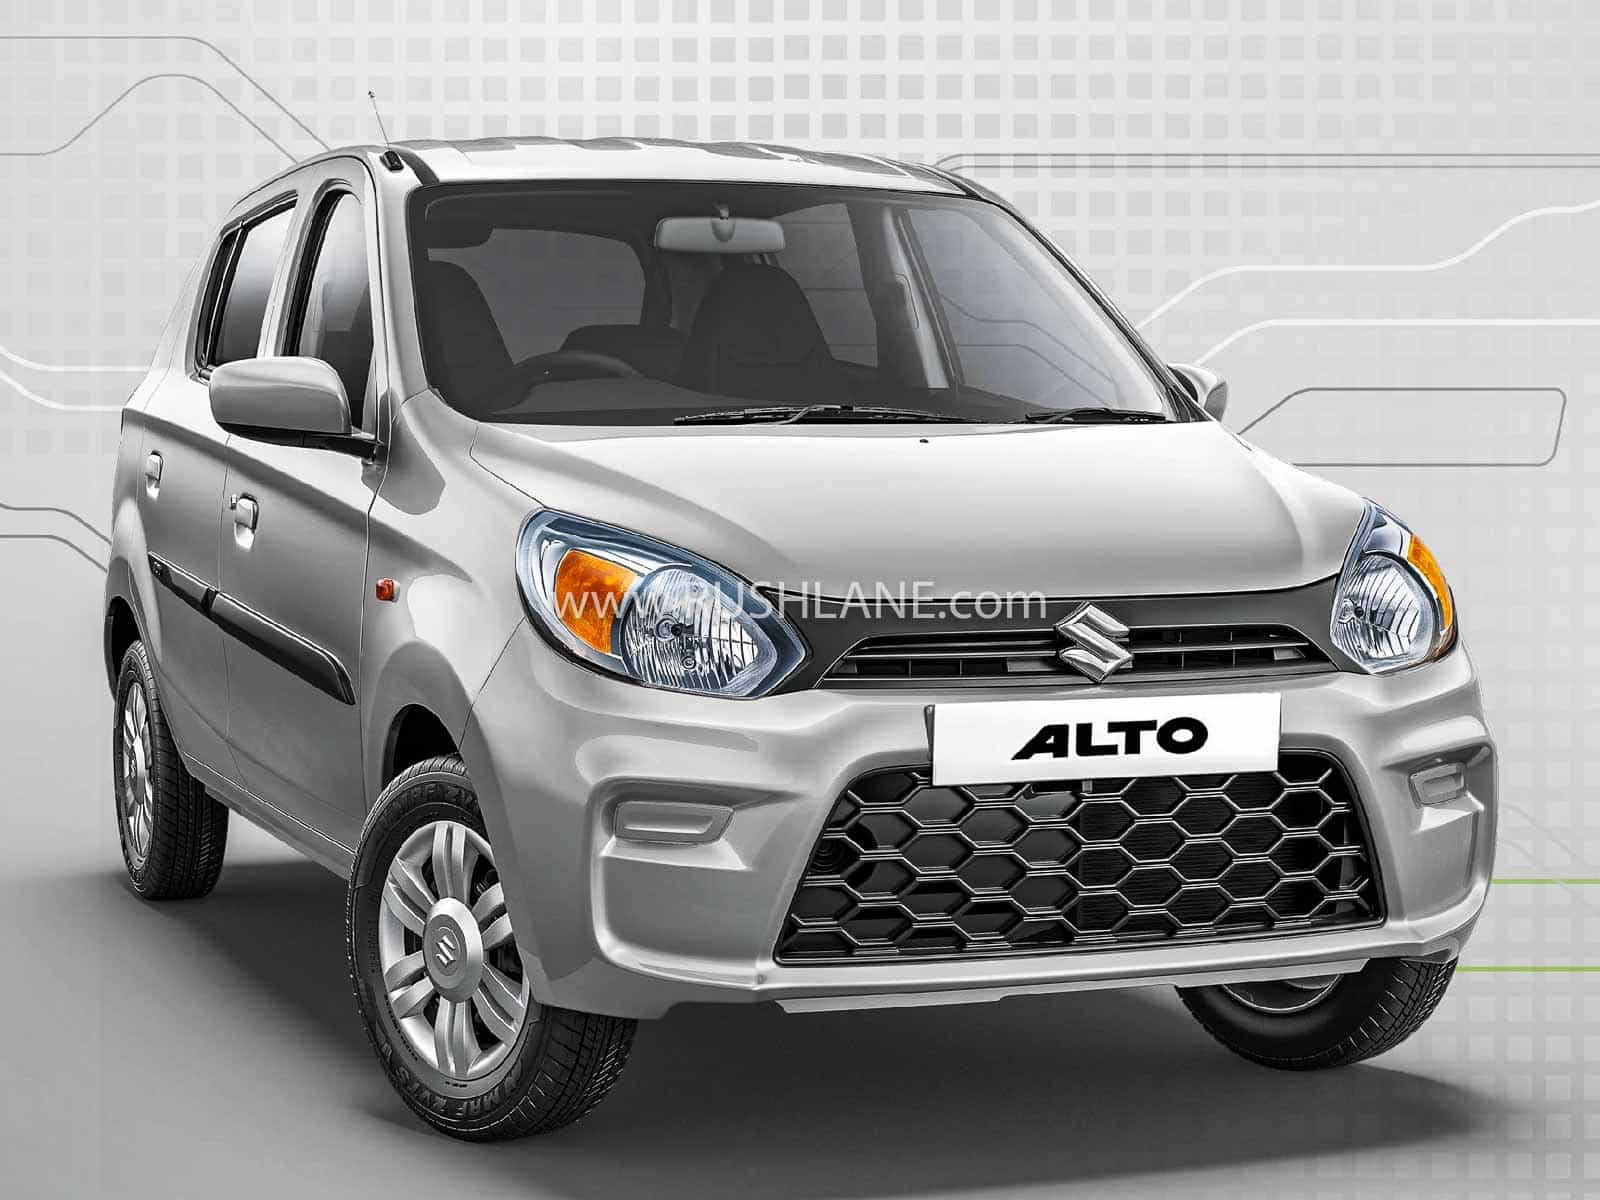 Maruti Alto CNG BS6 launch price Rs 4.32 lakh for LXi trim